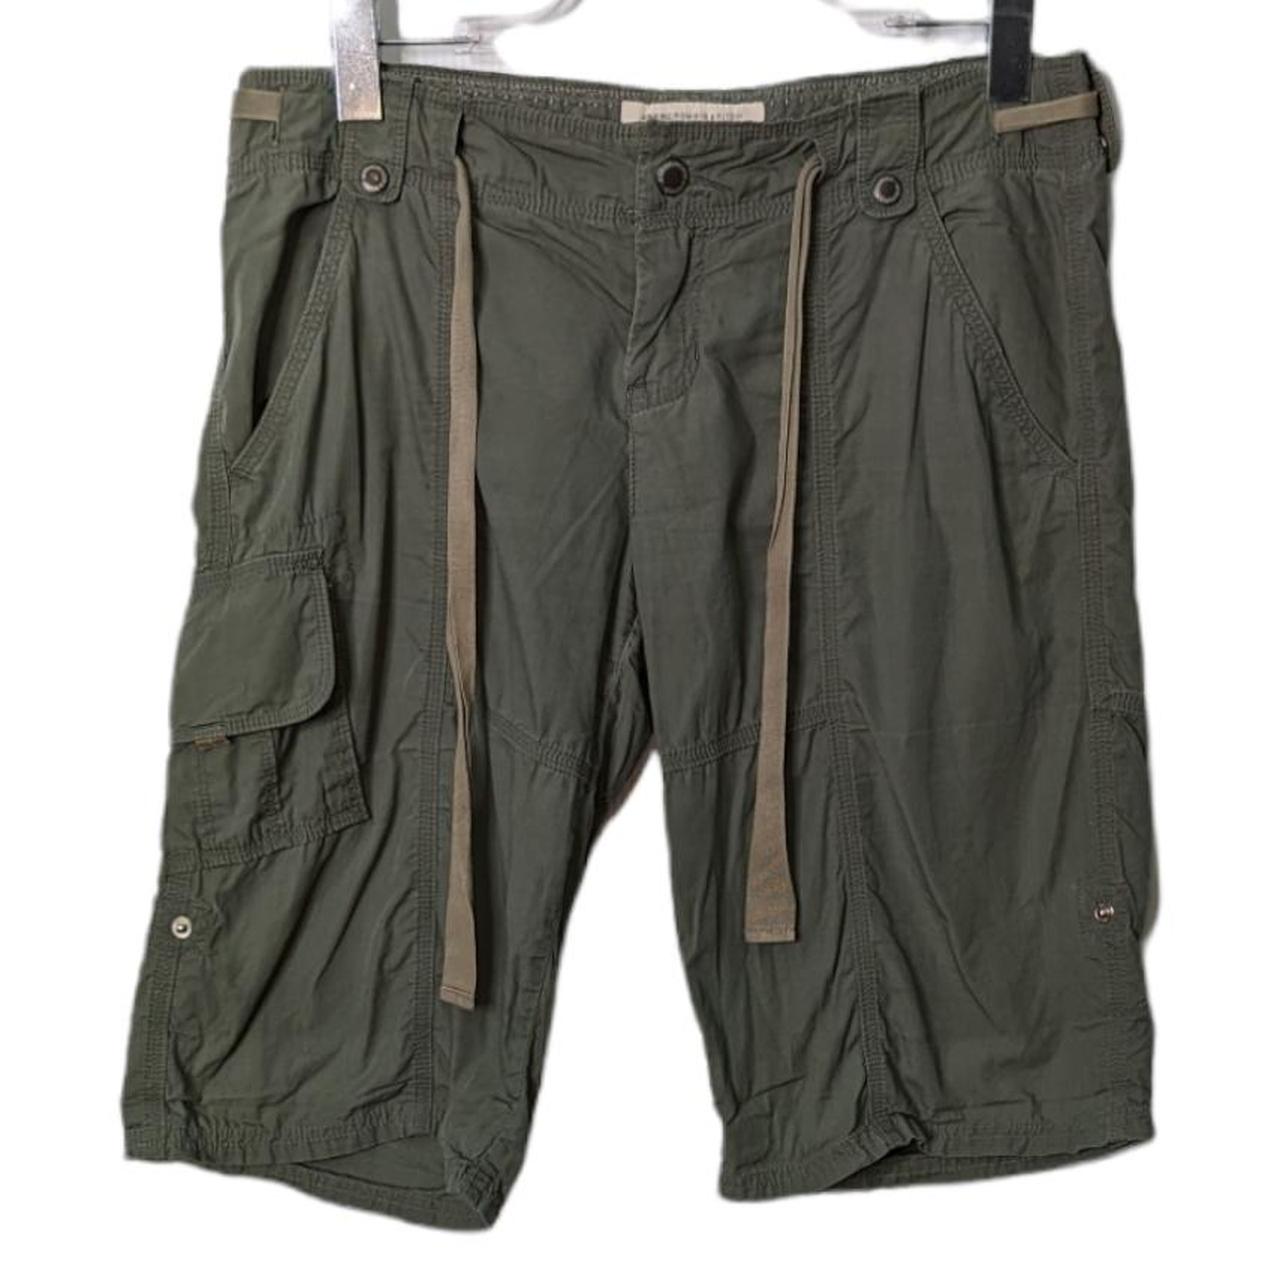 Y2K Abercrombie & Fitch Cargo Shorts Green Low Rise... - Depop